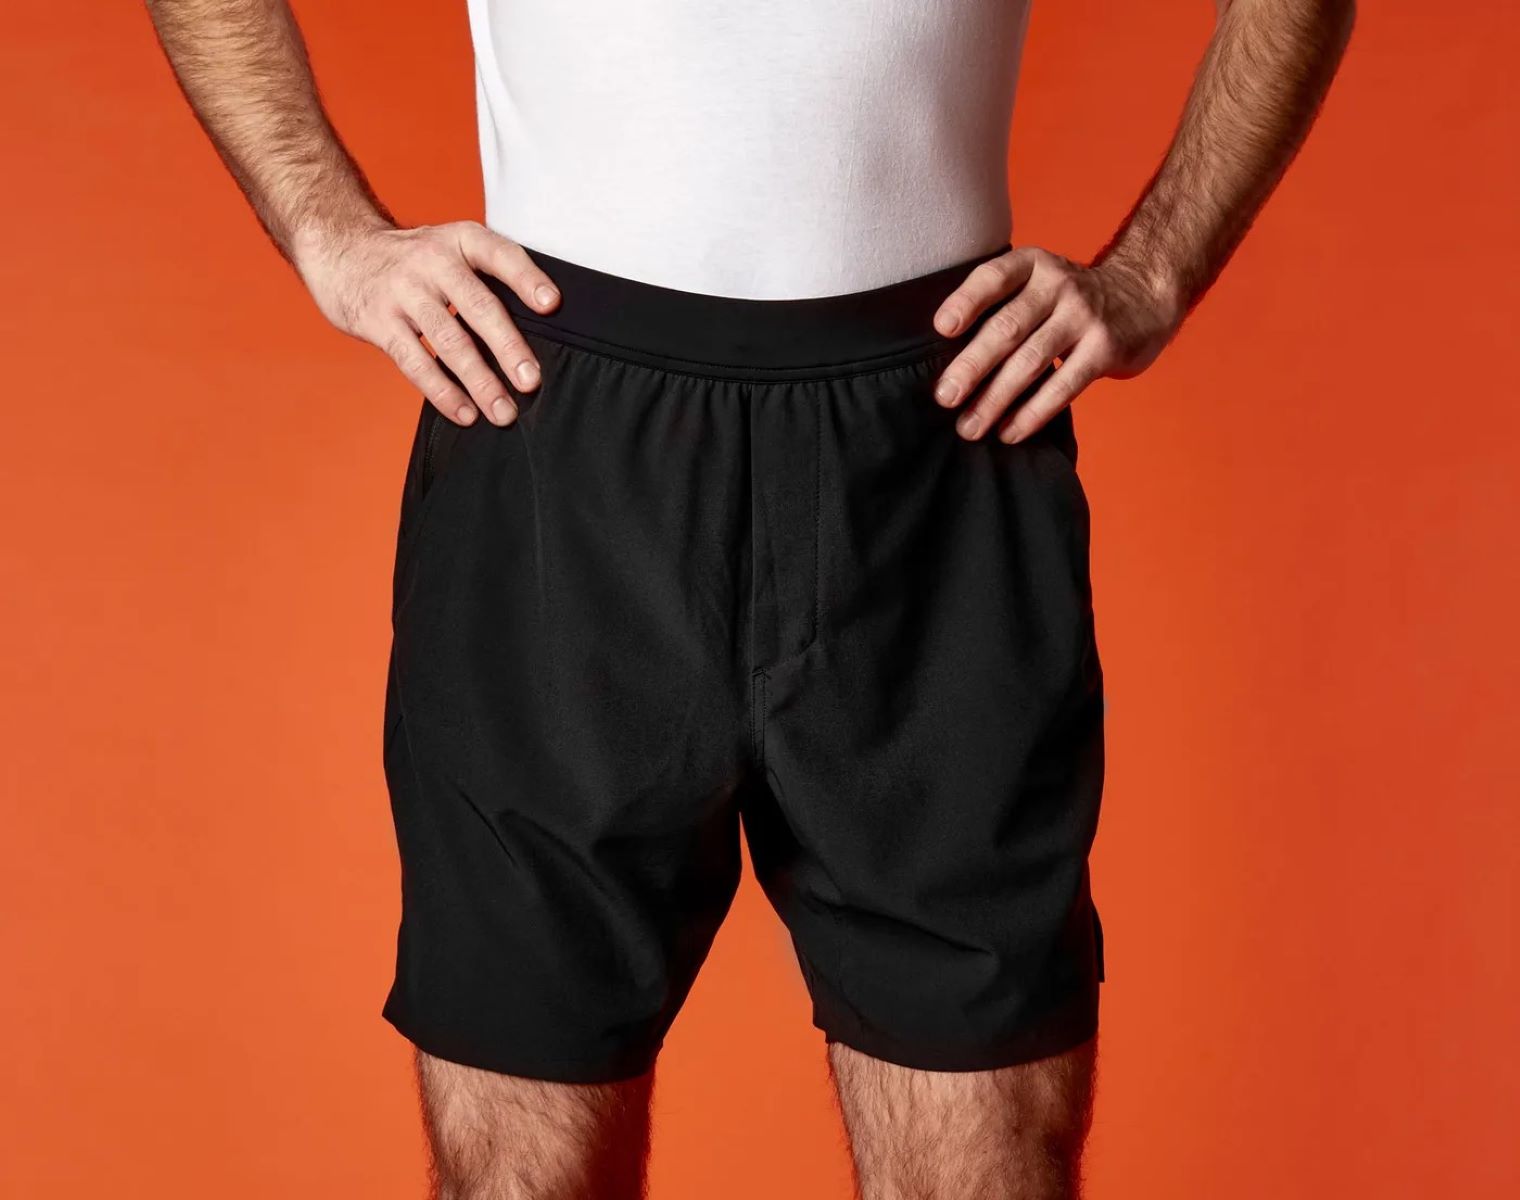 Athletes’ Ultimate Choice: Spandex Or Cotton For Workout Shorts? Find Out Now!